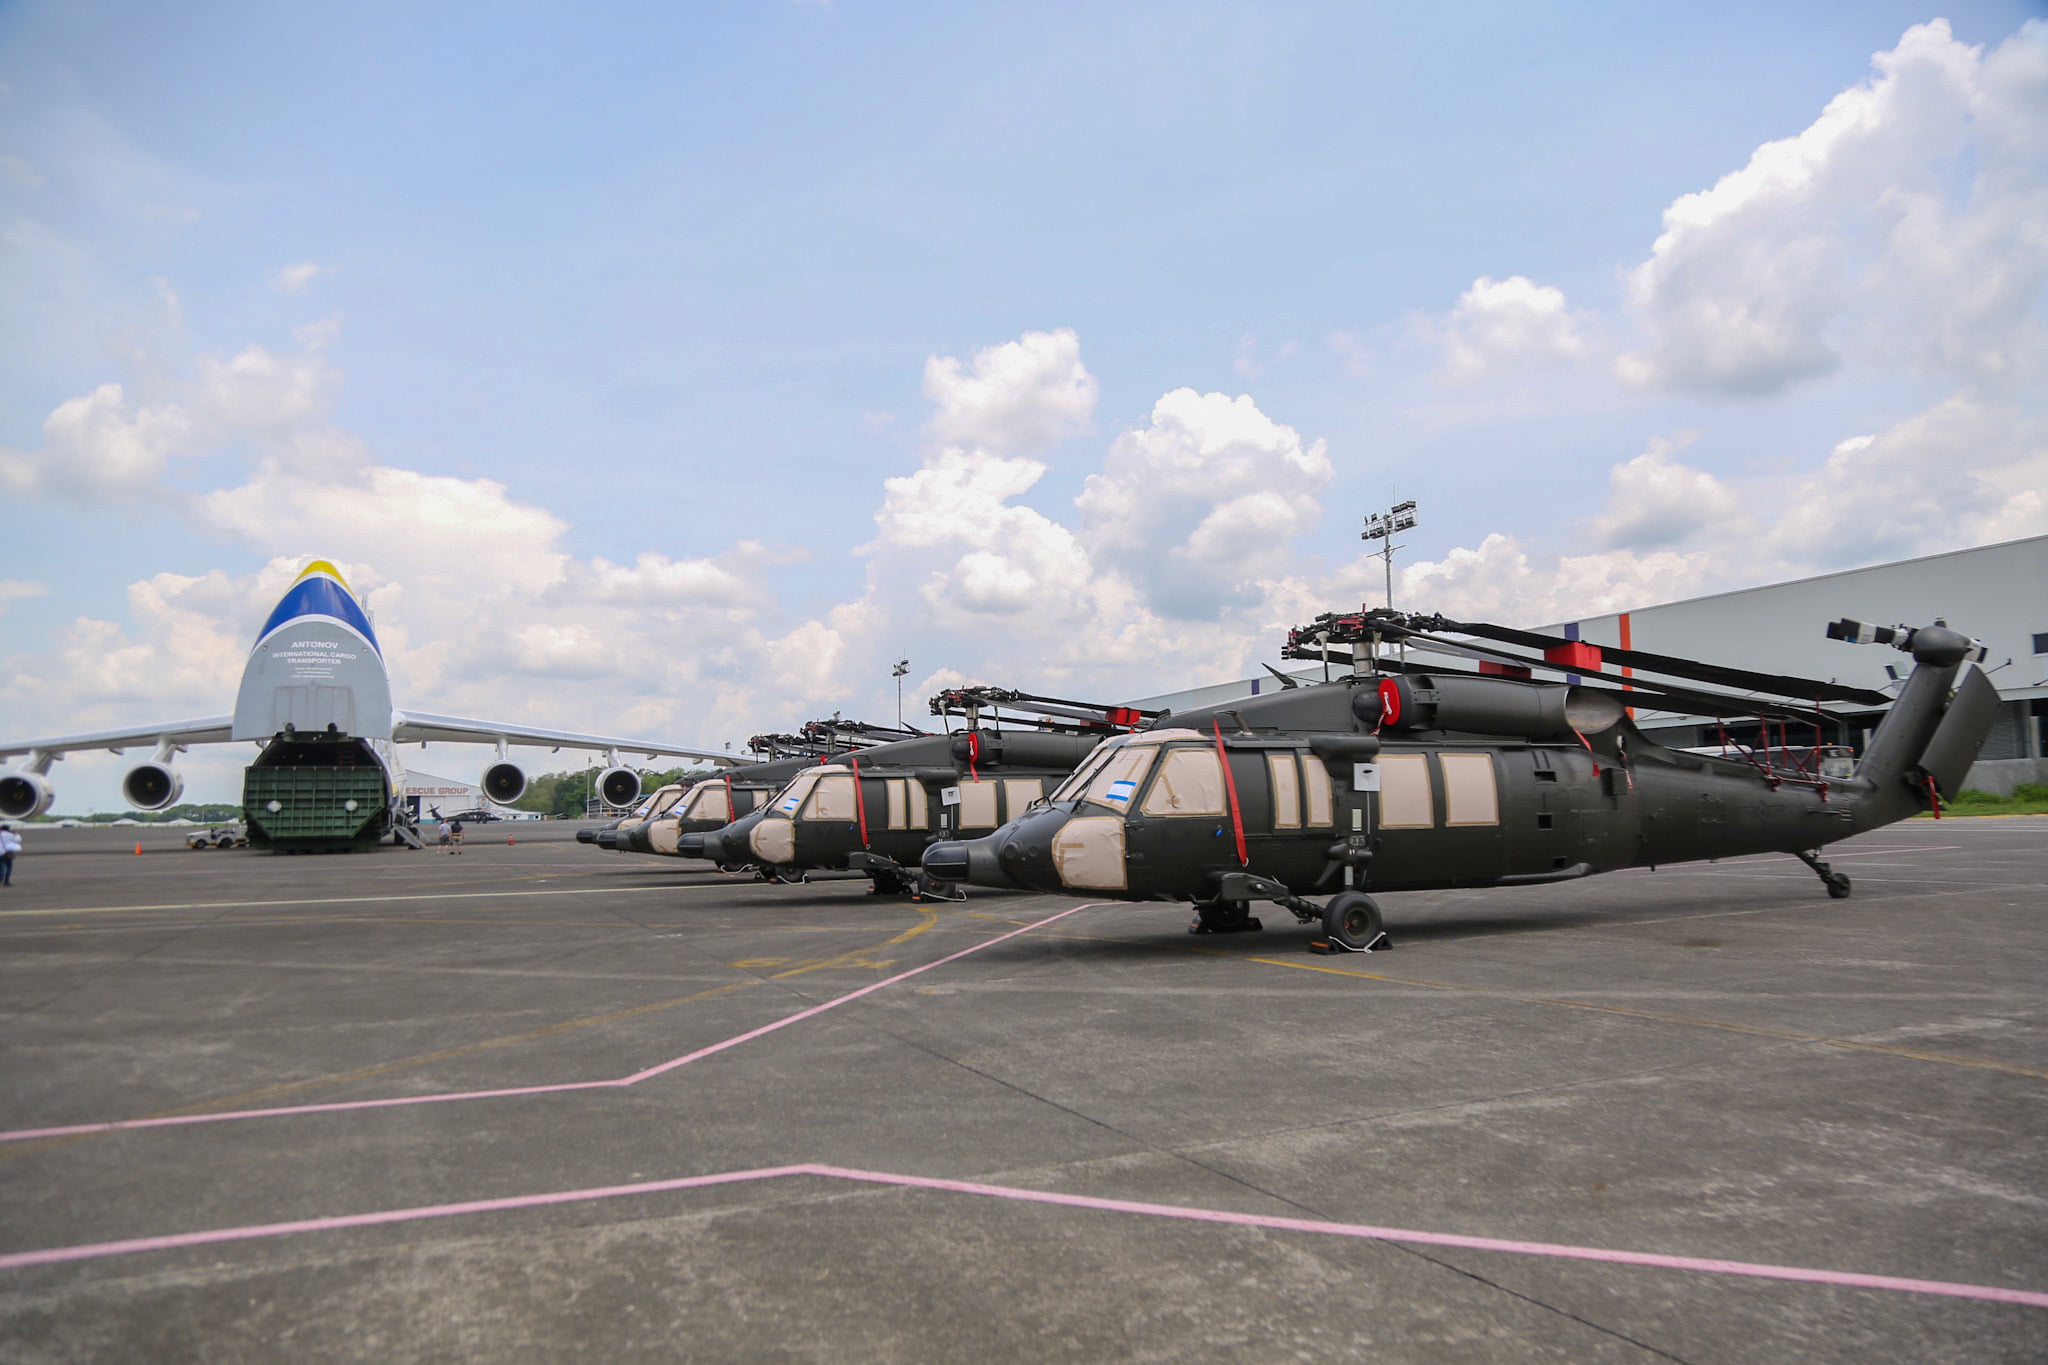 Philippine Air Force Receives Five More S-70i Black Hawk Combat Utility Helicopters